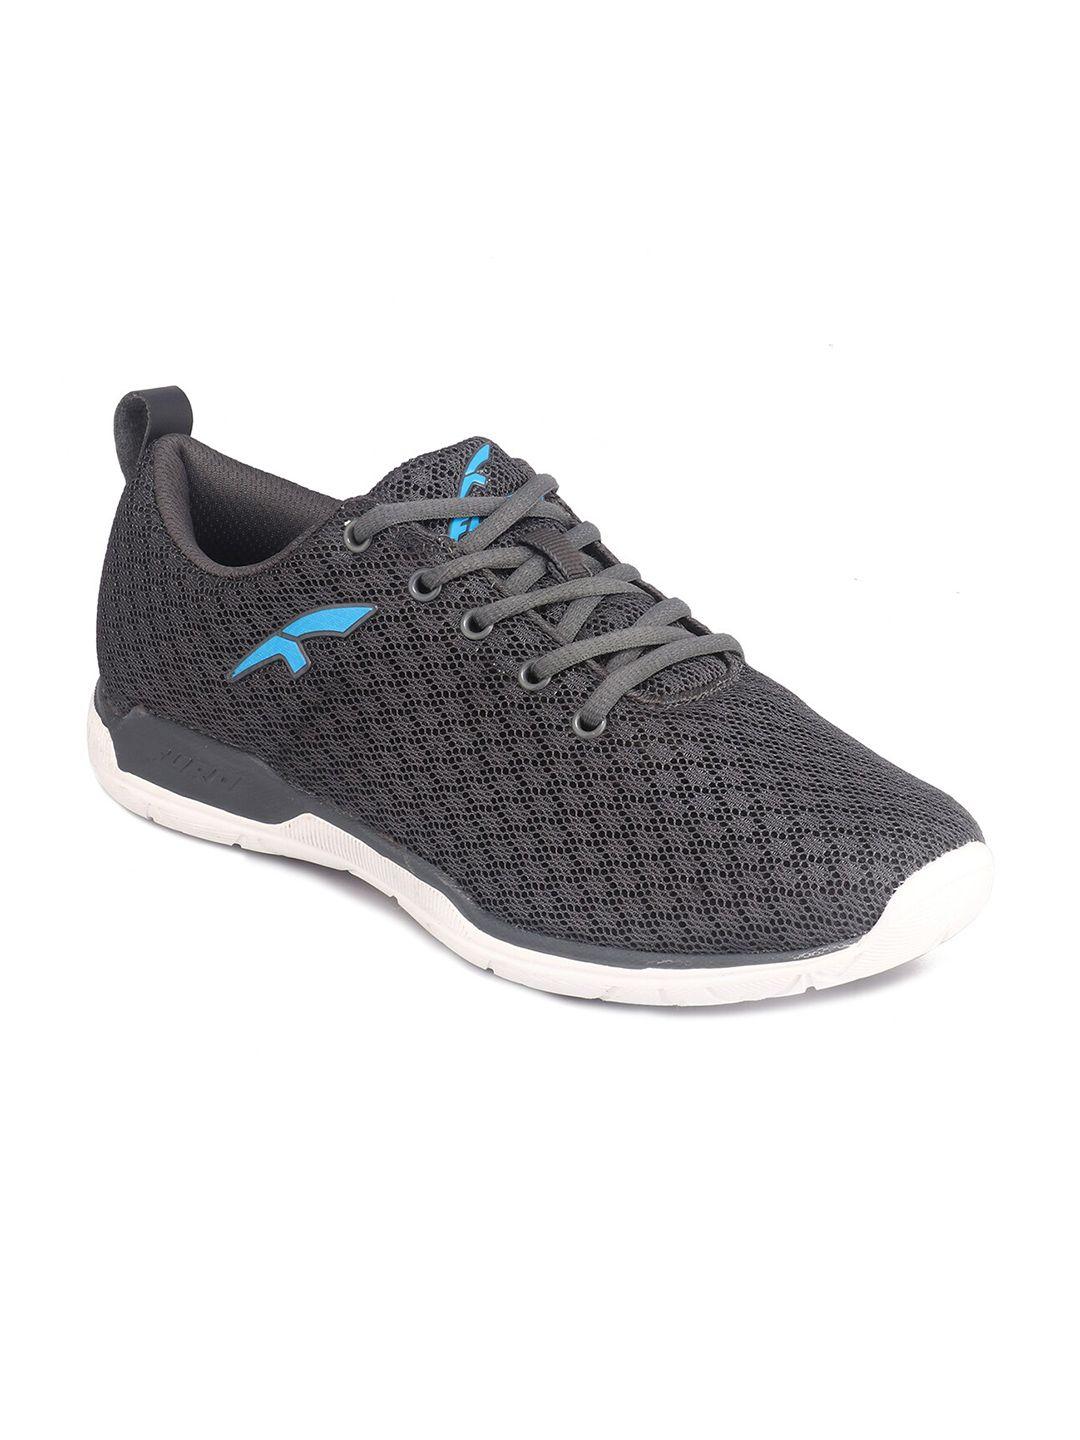 furo by red chief men mesh walking sports shoes